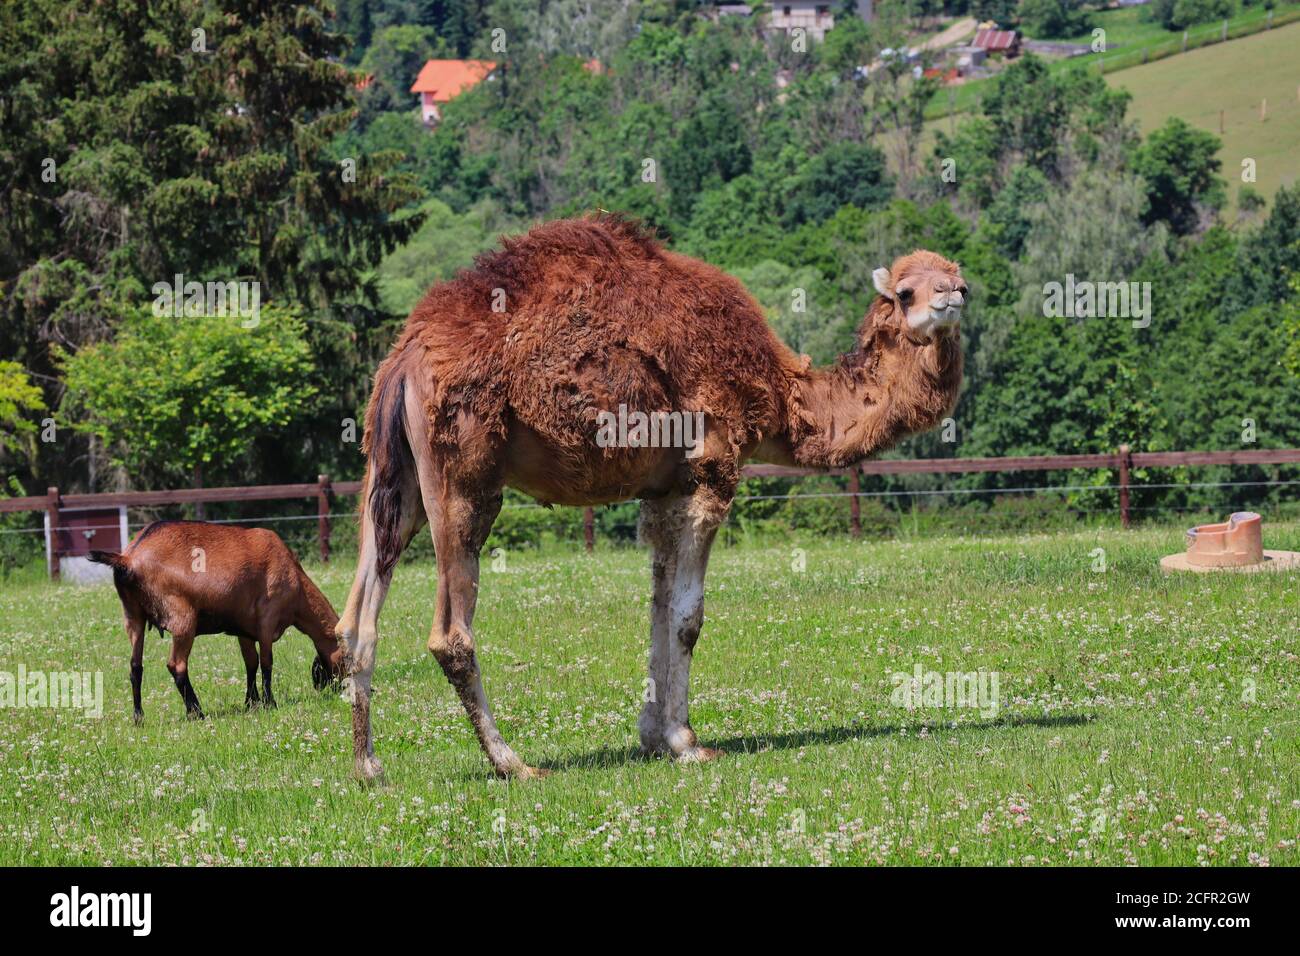 Dromedary Camel also called Somali or Arabian Camel with Anglo-Nubian Goat in Czech Farm Park. Camelus Dromedarius with One Hump and Brown Goat. Stock Photo